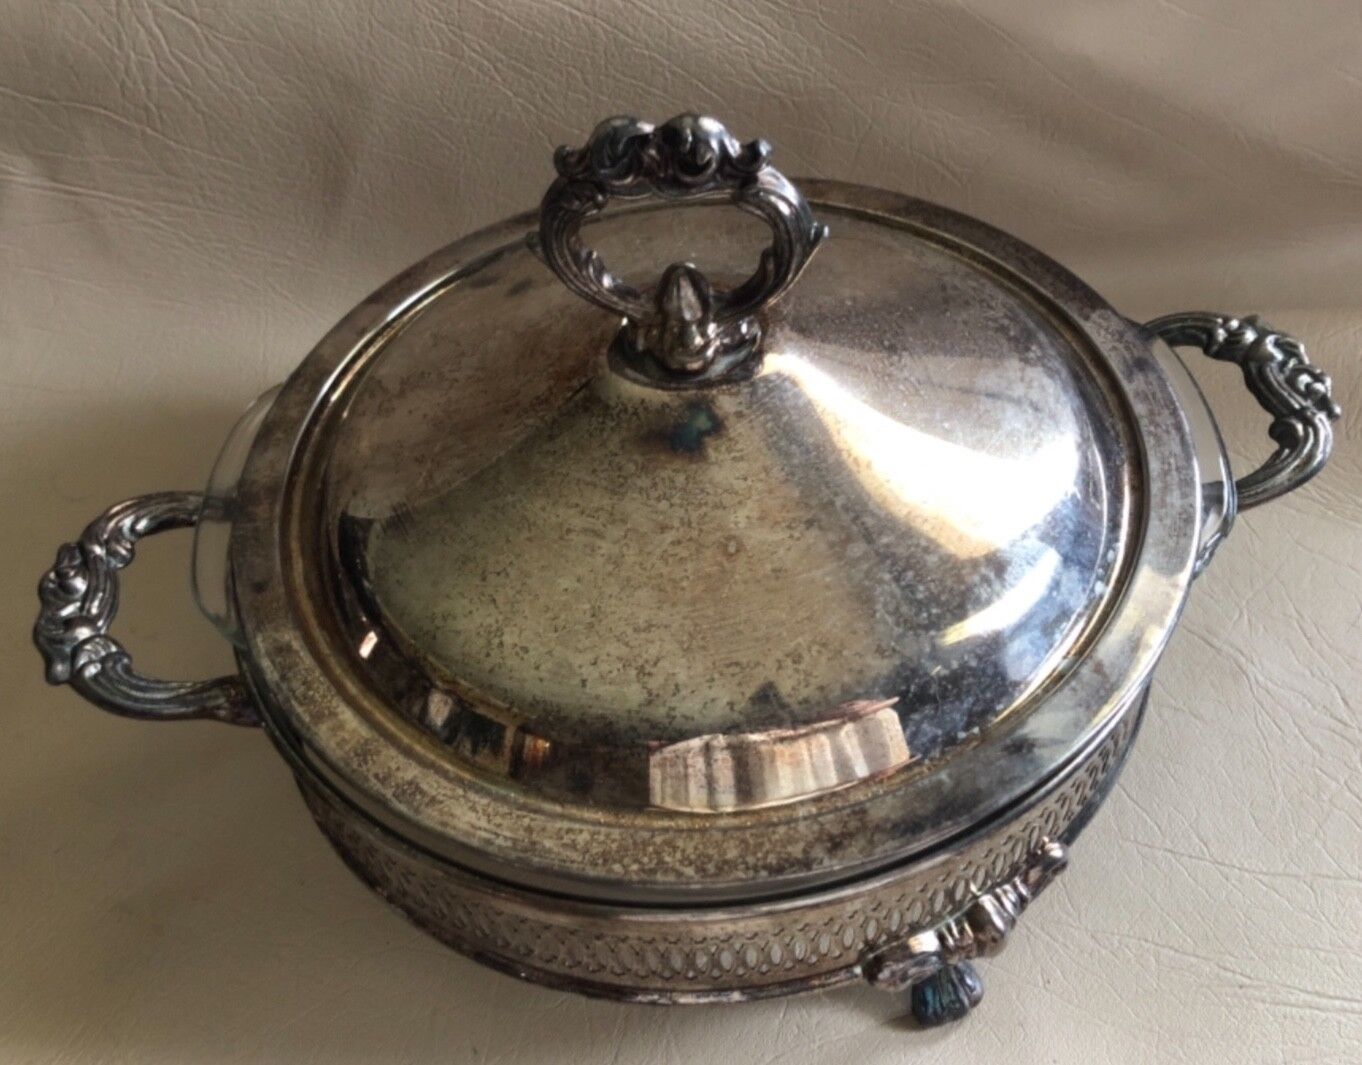 Raimond Silverplate covered serving dish w Anchor Hocking Fire King glass dish